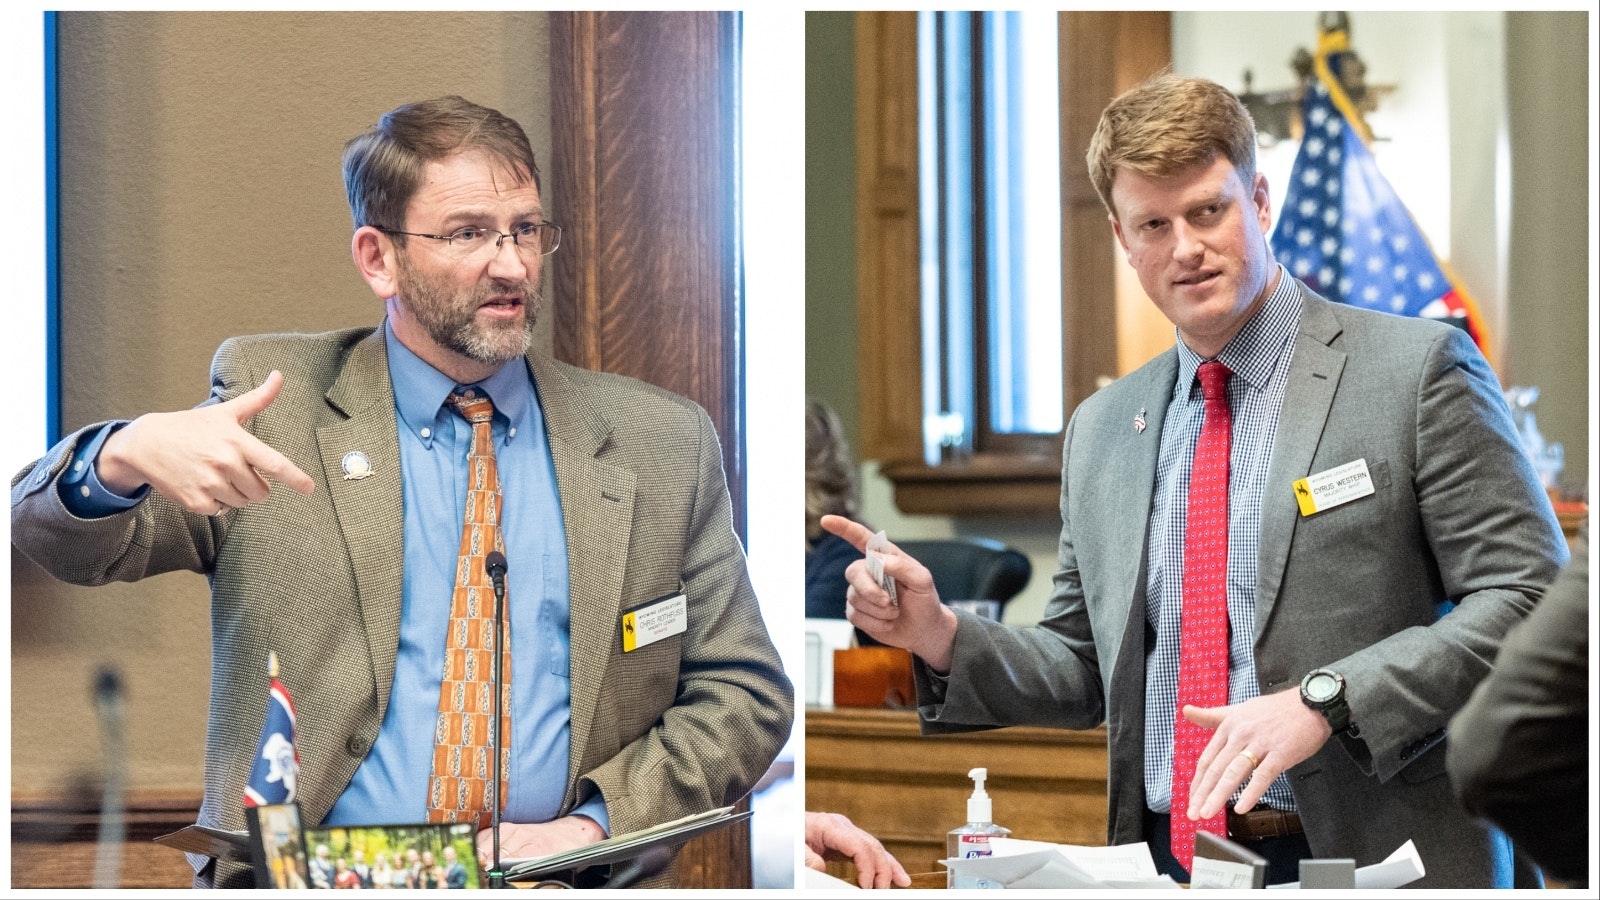 Wyoming state Sen. Chris Rothfuss, D-Laramie, left, and Rep. Cyrus Western, R-Big Horn, serve on the state's Select Blockchain Committee and say Wyoming can continue to be a leader in the digital space by working with top experts on regulating generative AI.